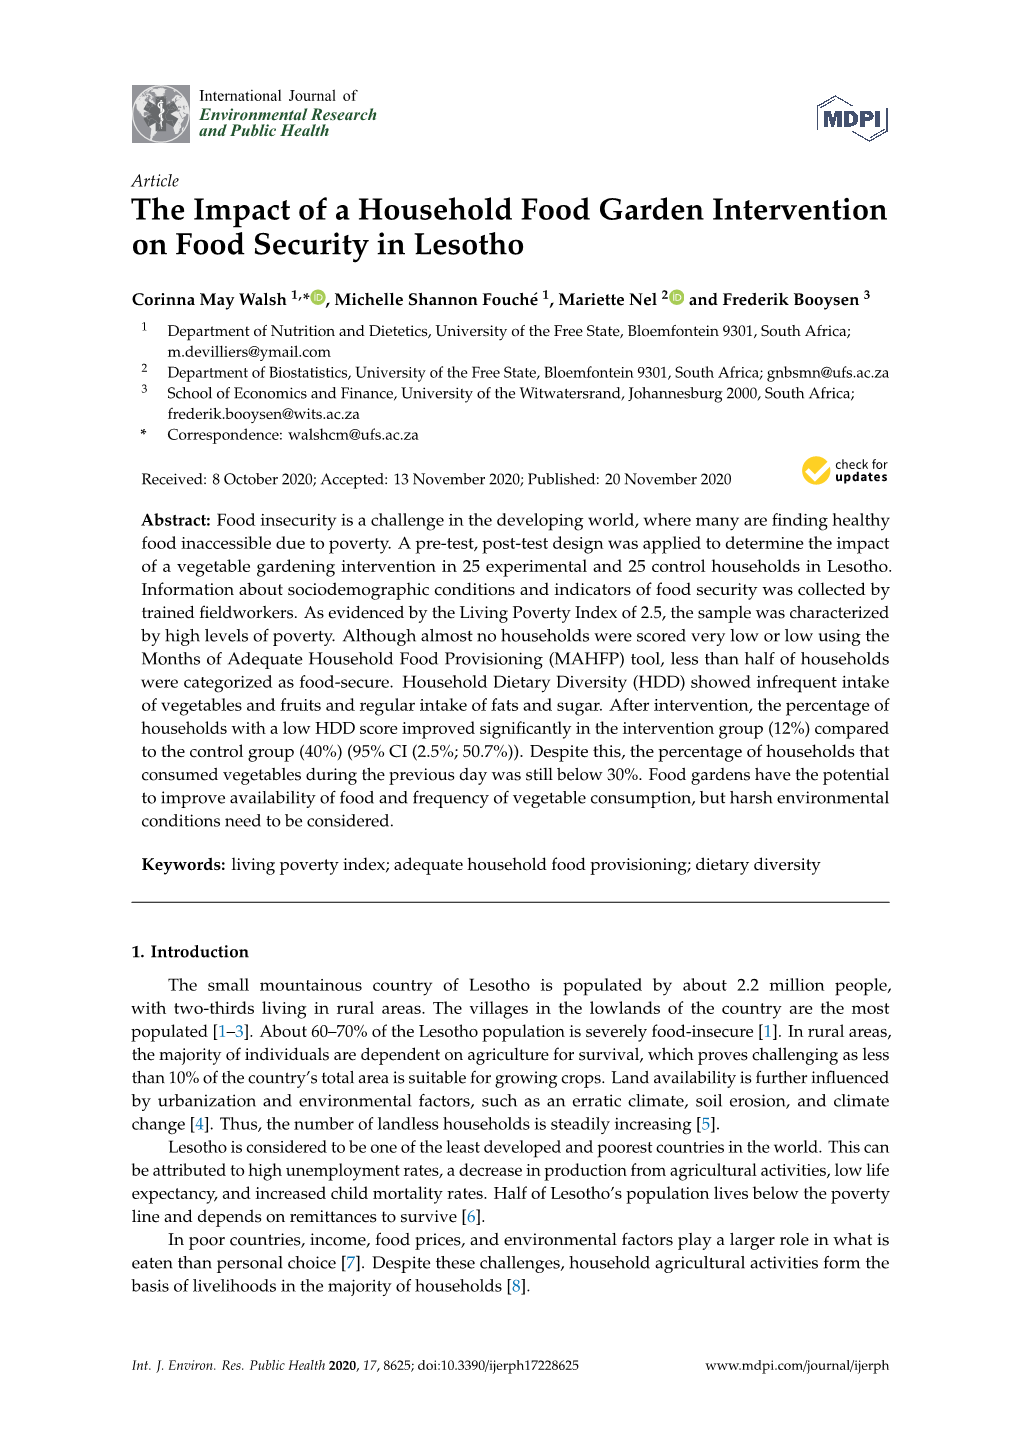 The Impact of a Household Food Garden Intervention on Food Security in Lesotho